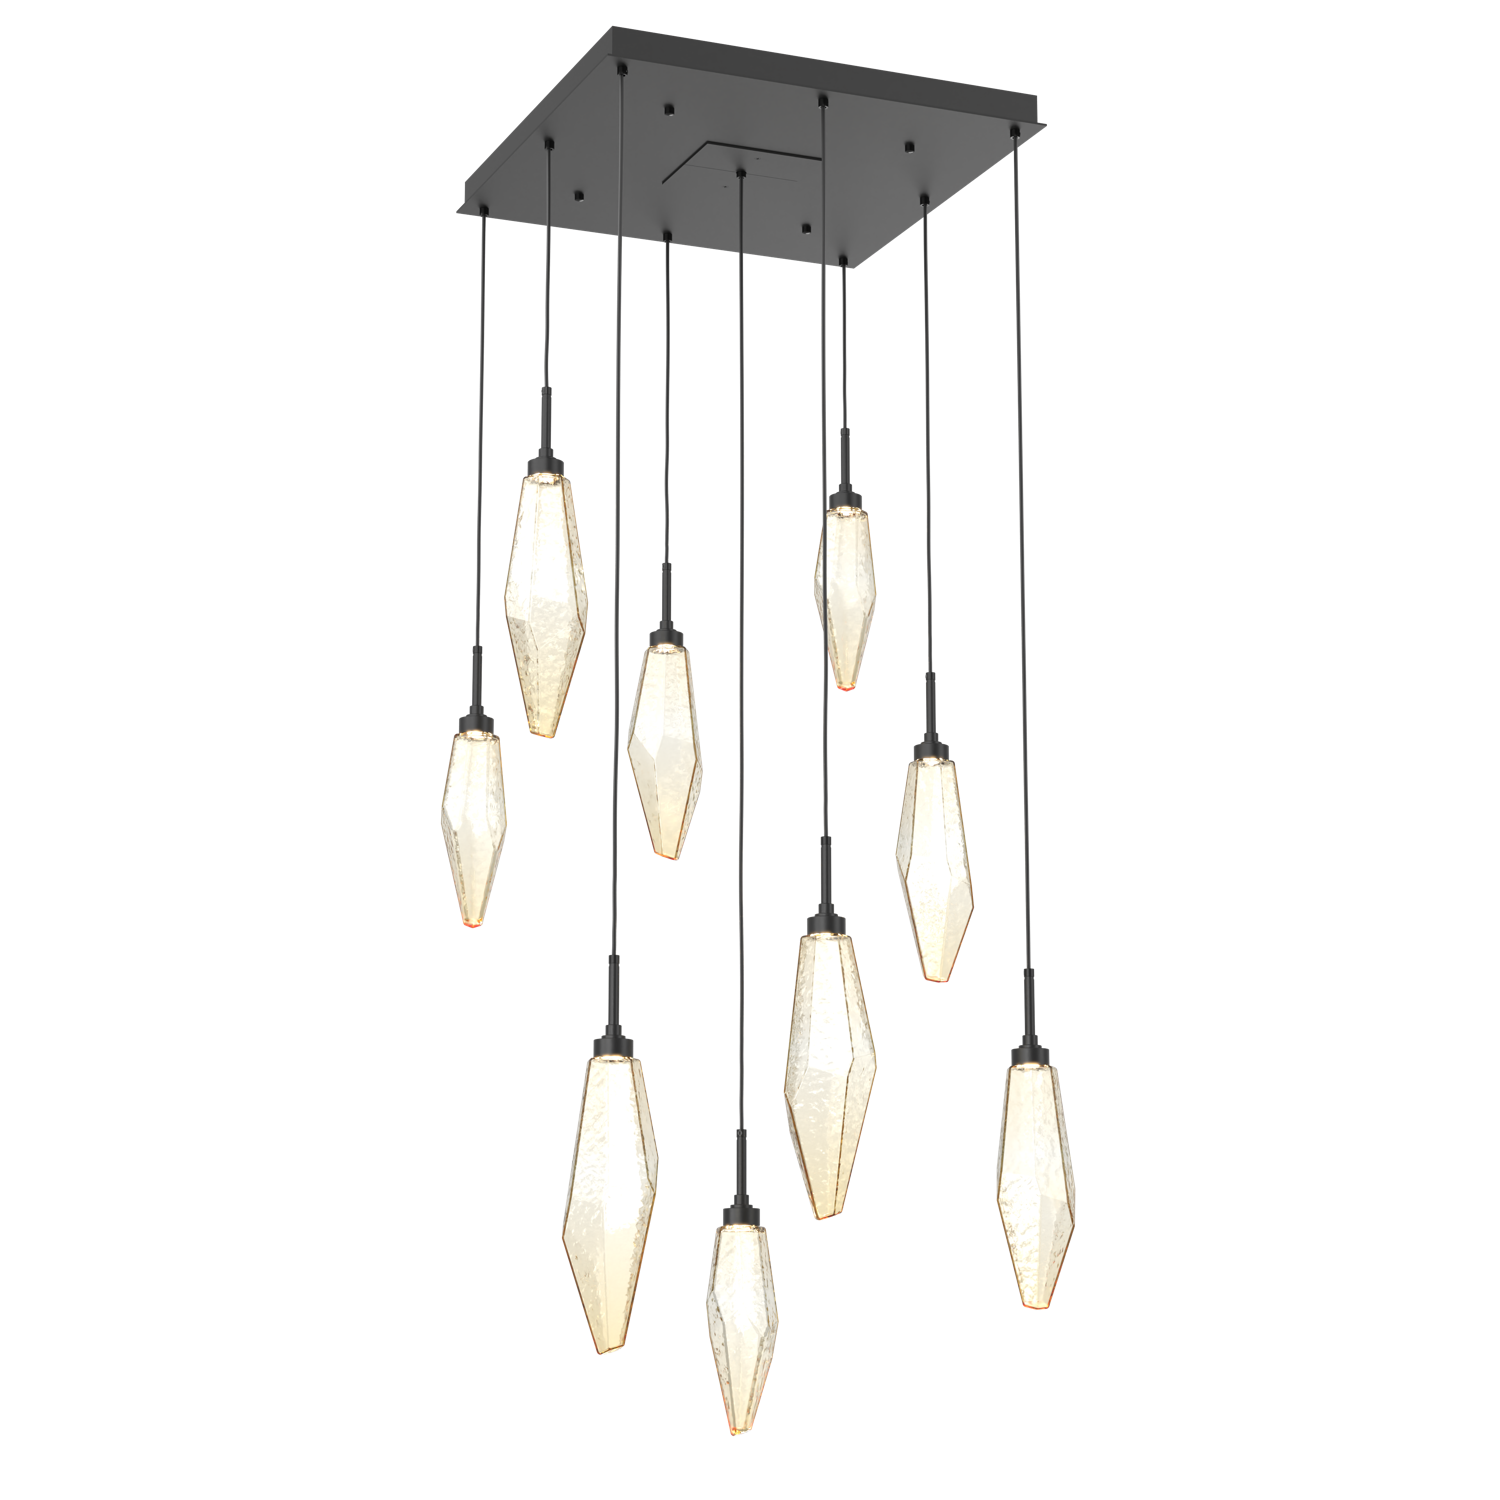 CHB0050-09-MB-CA-Hammerton-Studio-Rock-Crystal-9-light-square-pendant-chandelier-with-matte-black-finish-and-chilled-amber-blown-glass-shades-and-LED-lamping